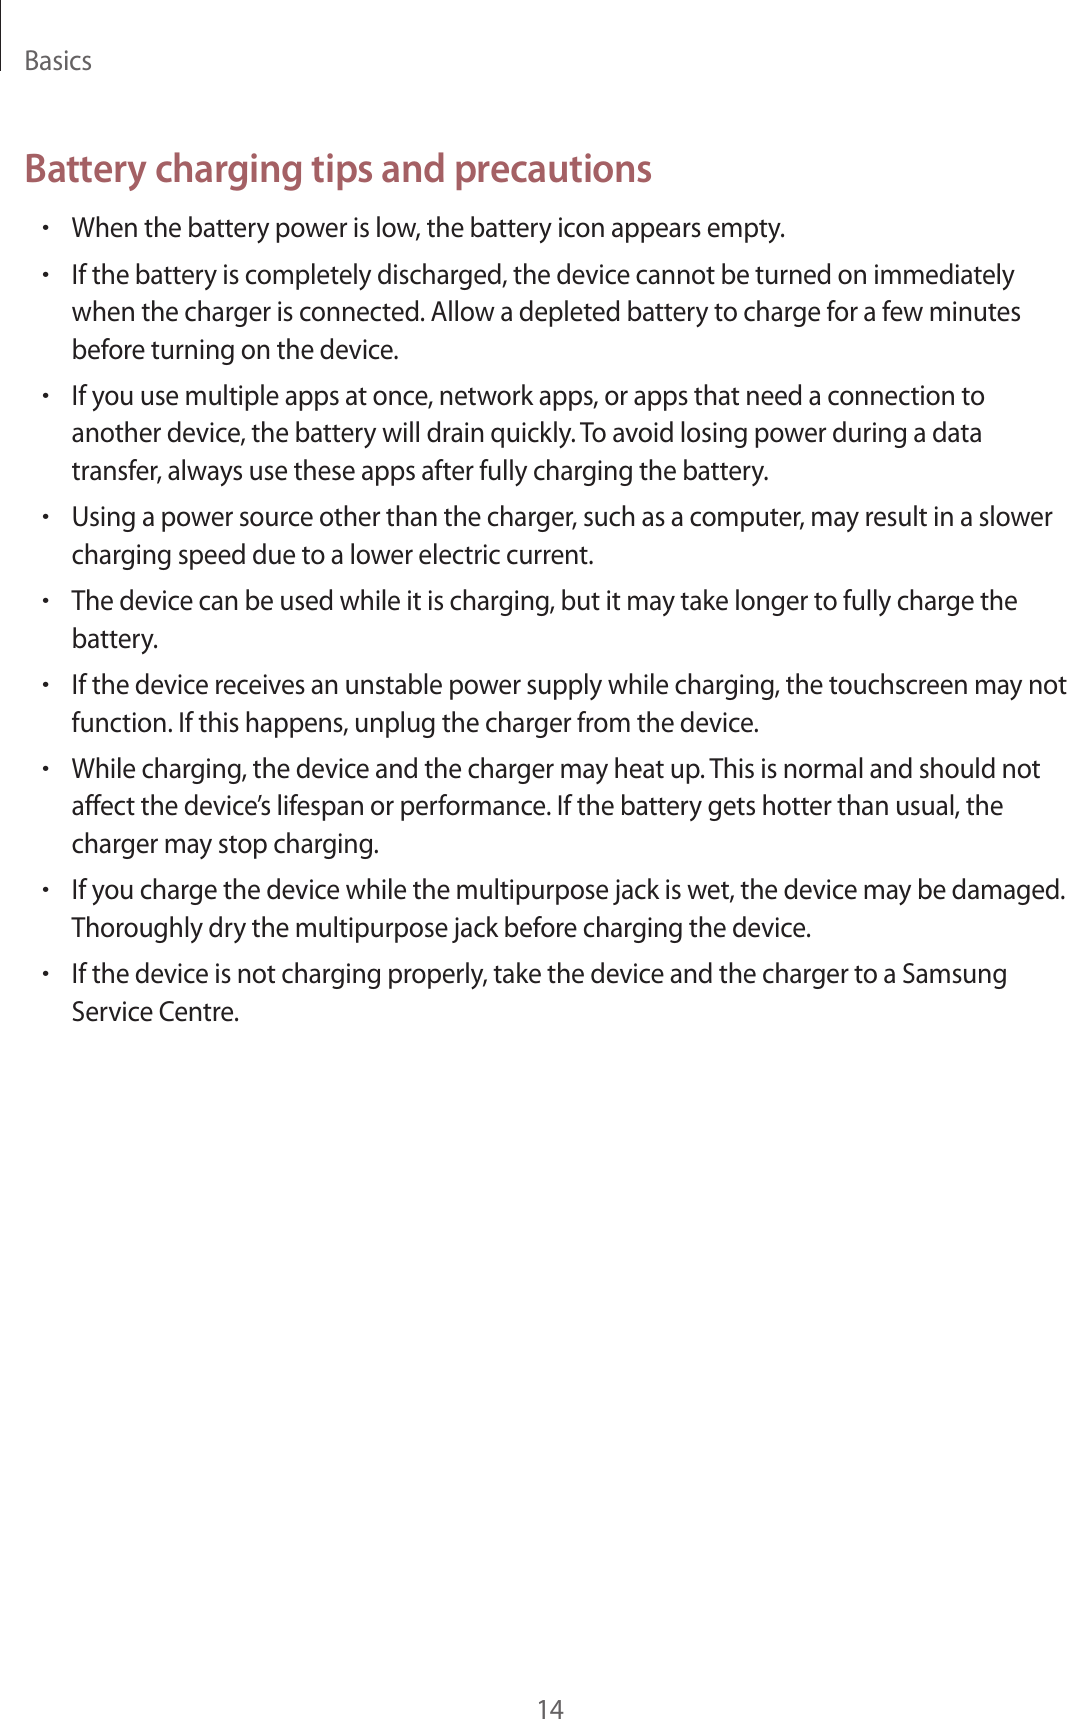 Basics14Battery charging tips and precautions•When the battery power is low, the battery icon appears empty.•If the battery is completely discharged, the device cannot be turned on immediatelywhen the charger is connected. Allow a depleted battery to charge for a few minutesbefore turning on the device.•If you use multiple apps at once, network apps, or apps that need a connection toanother device, the battery will drain quickly. To avoid losing power during a datatransfer, always use these apps after fully charging the battery.•Using a power source other than the charger, such as a computer, may result in a slowercharging speed due to a lower electric current.•The device can be used while it is charging, but it may take longer to fully charge thebattery.•If the device receives an unstable power supply while charging, the touchscreen may notfunction. If this happens, unplug the charger from the device.•While charging, the device and the charger may heat up. This is normal and should notaffect the device’s lifespan or performance. If the battery gets hotter than usual, thecharger may stop charging.•If you charge the device while the multipurpose jack is wet, the device may be damaged.Thoroughly dry the multipurpose jack before charging the device.•If the device is not charging properly, take the device and the charger to a SamsungService Centre.